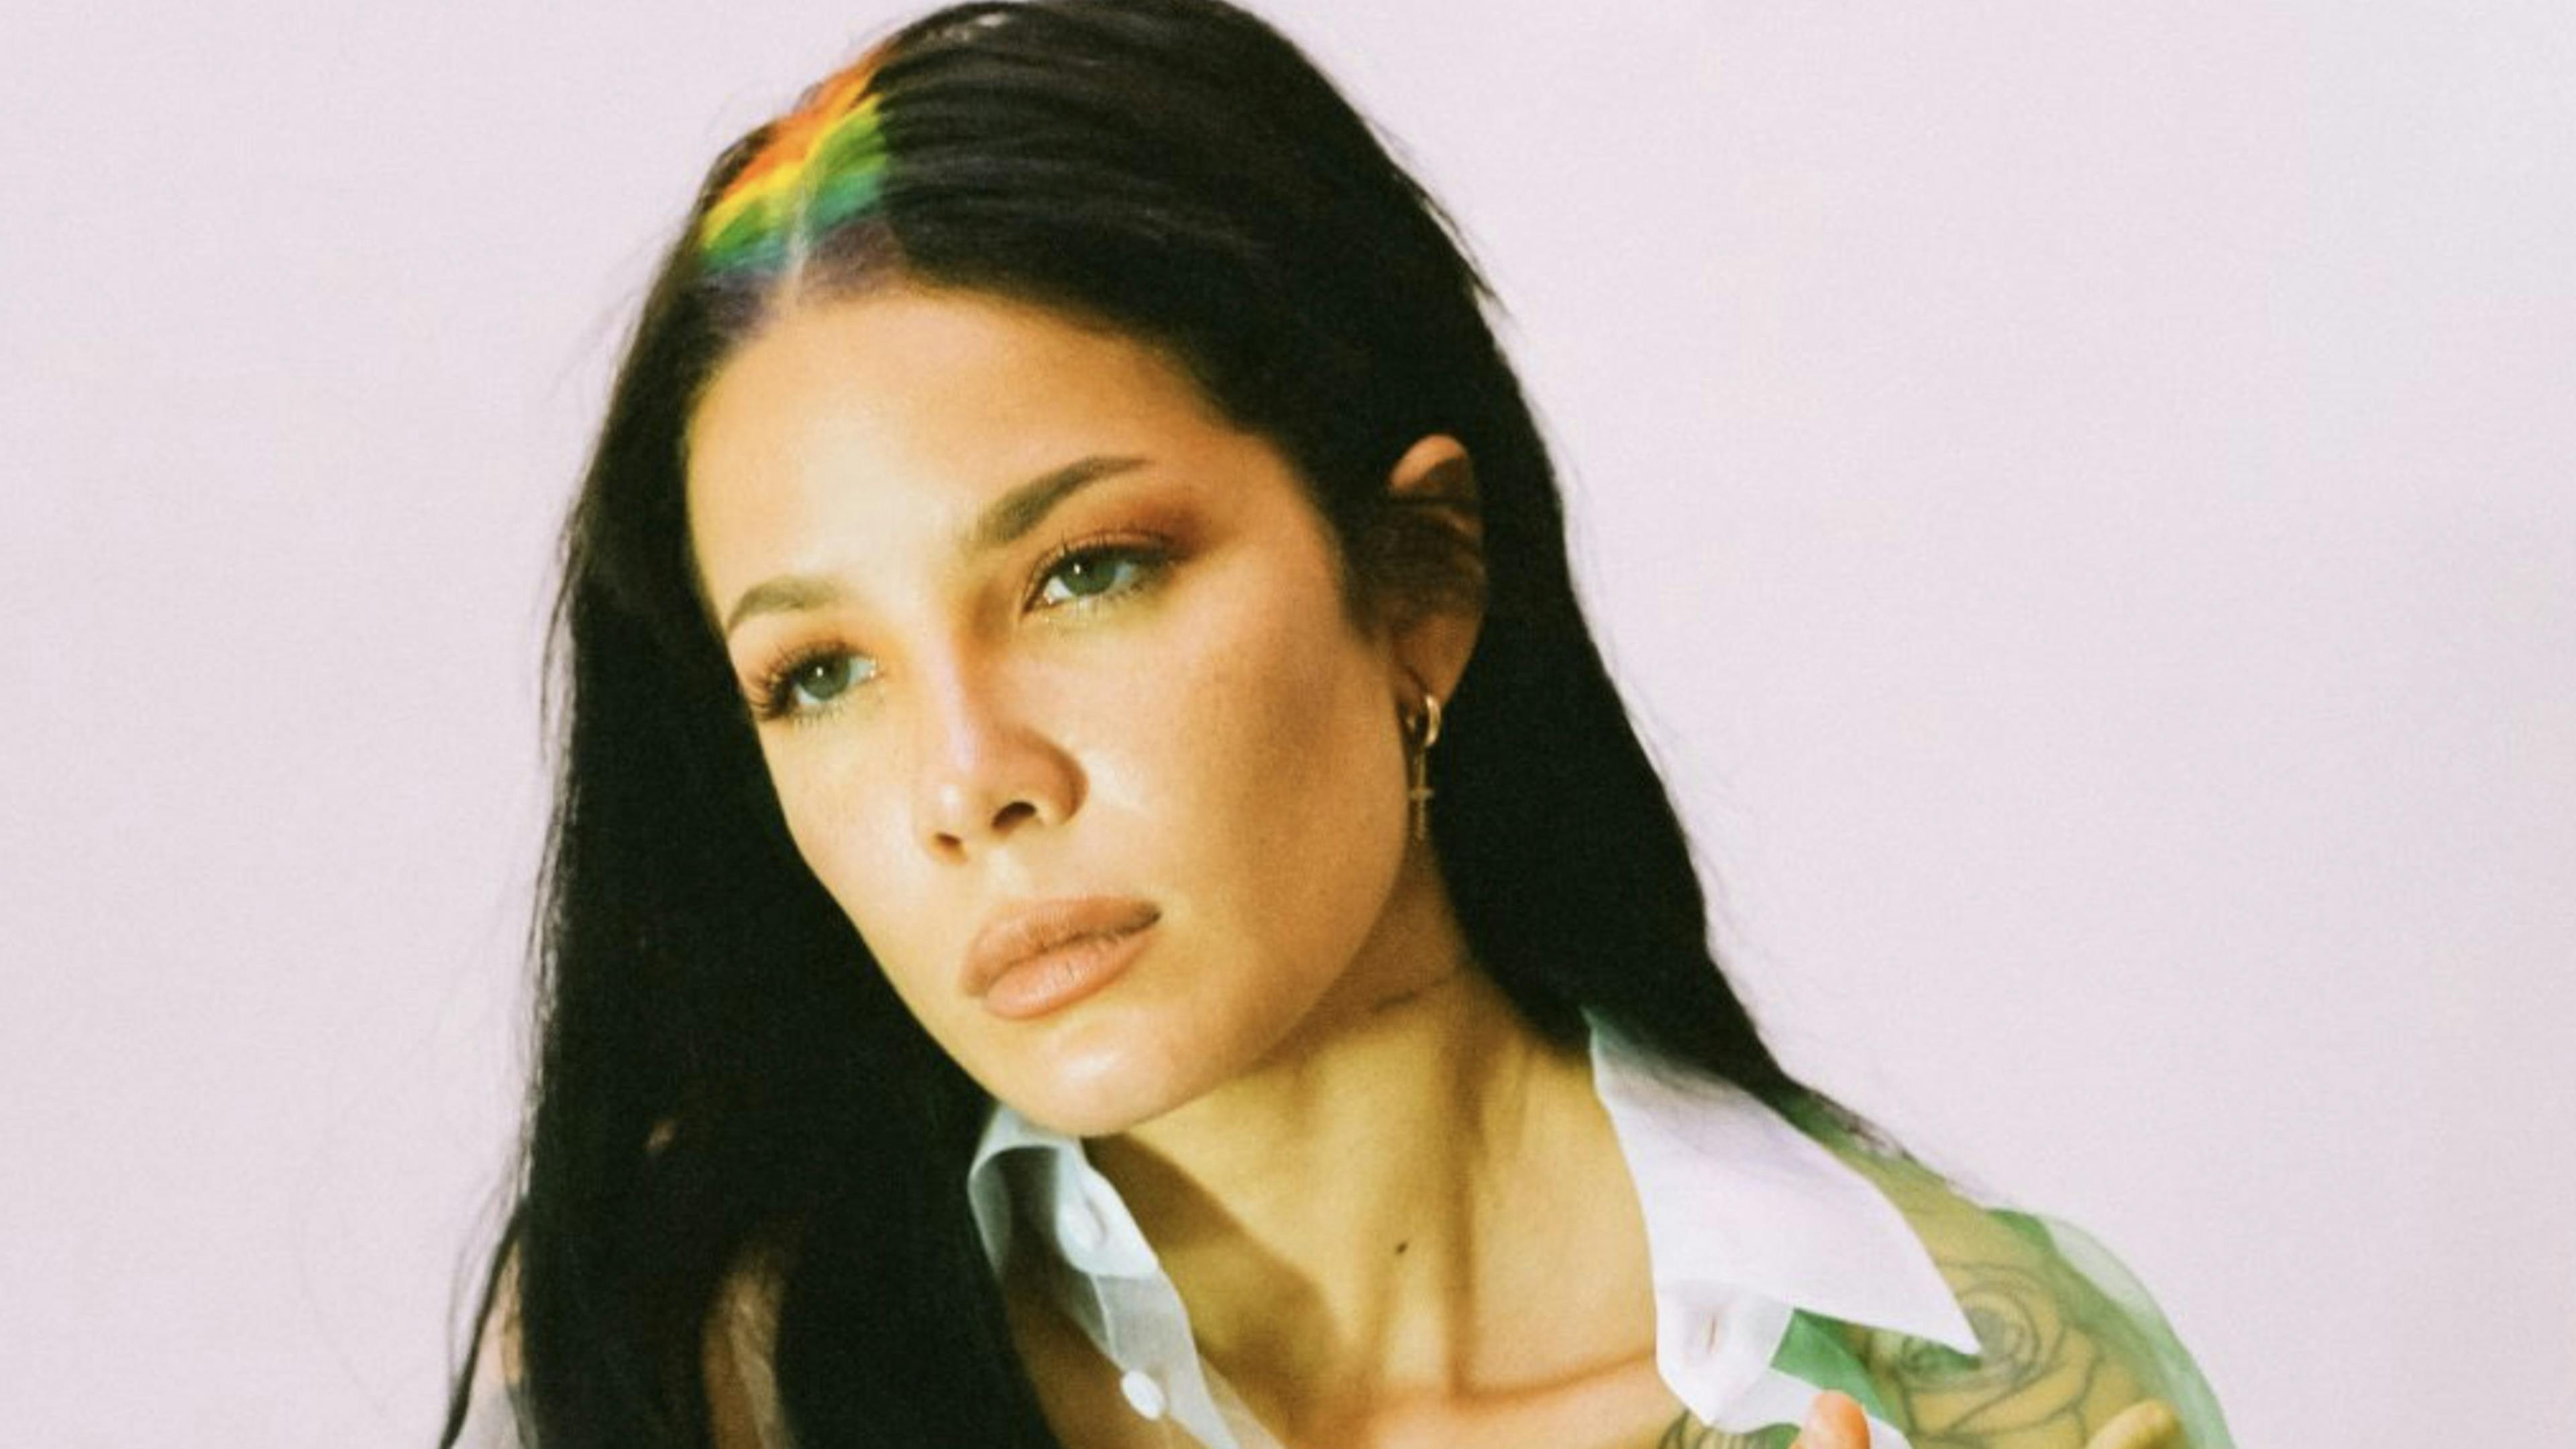 Halsey On Releasing A Punk Rock Album: "I Do Really Want To, But It Needs To Come Naturally"